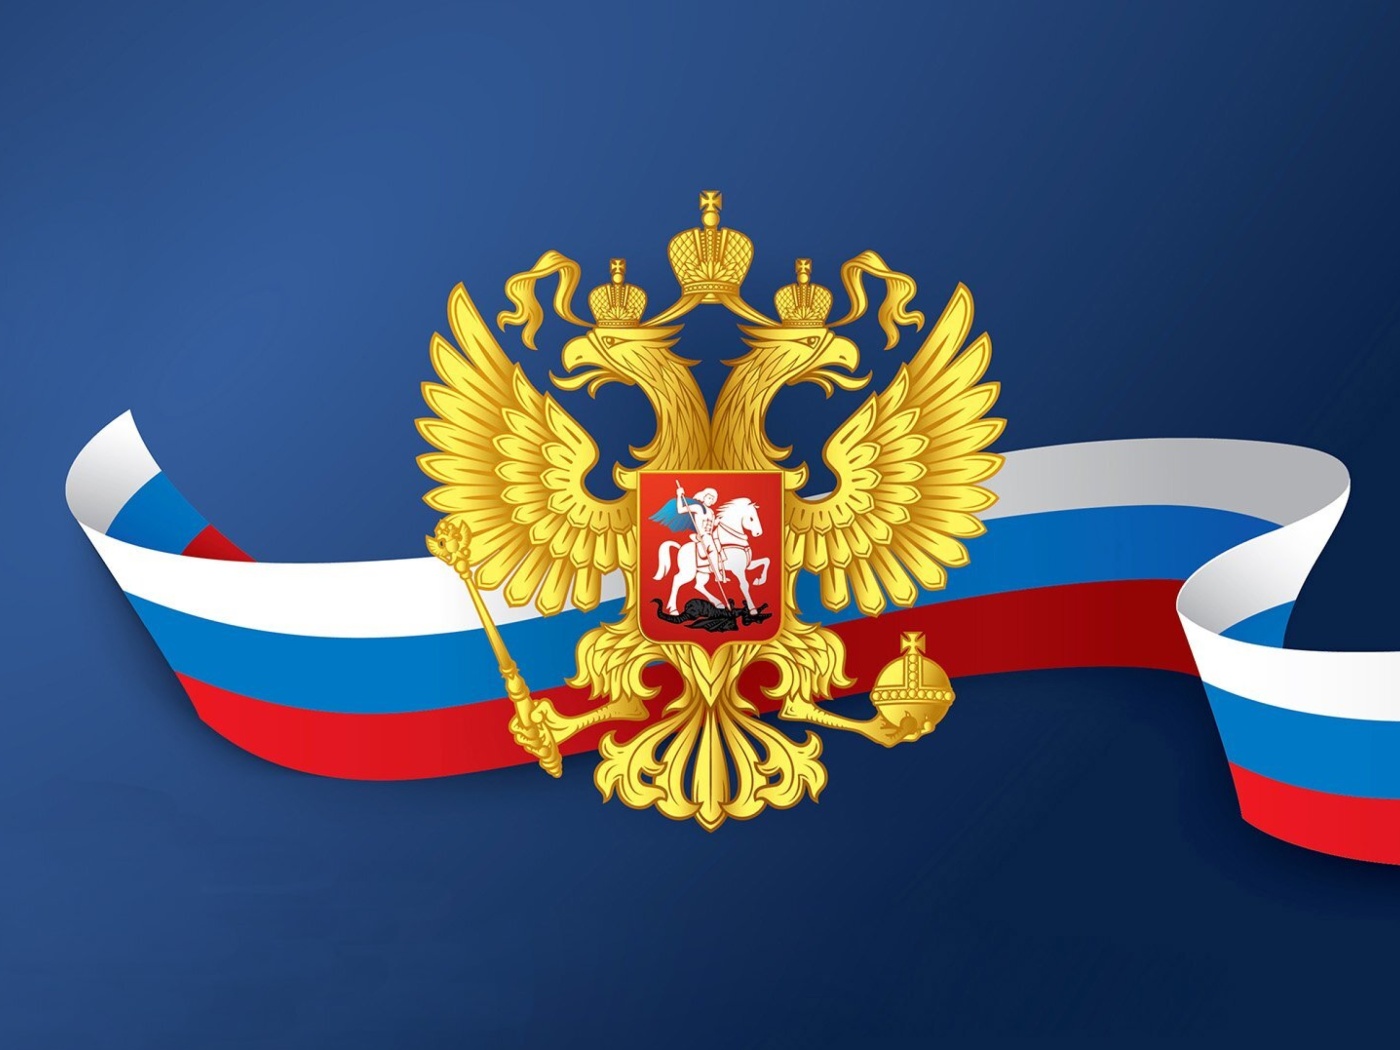 Russian coat of arms and flag screenshot #1 1400x1050